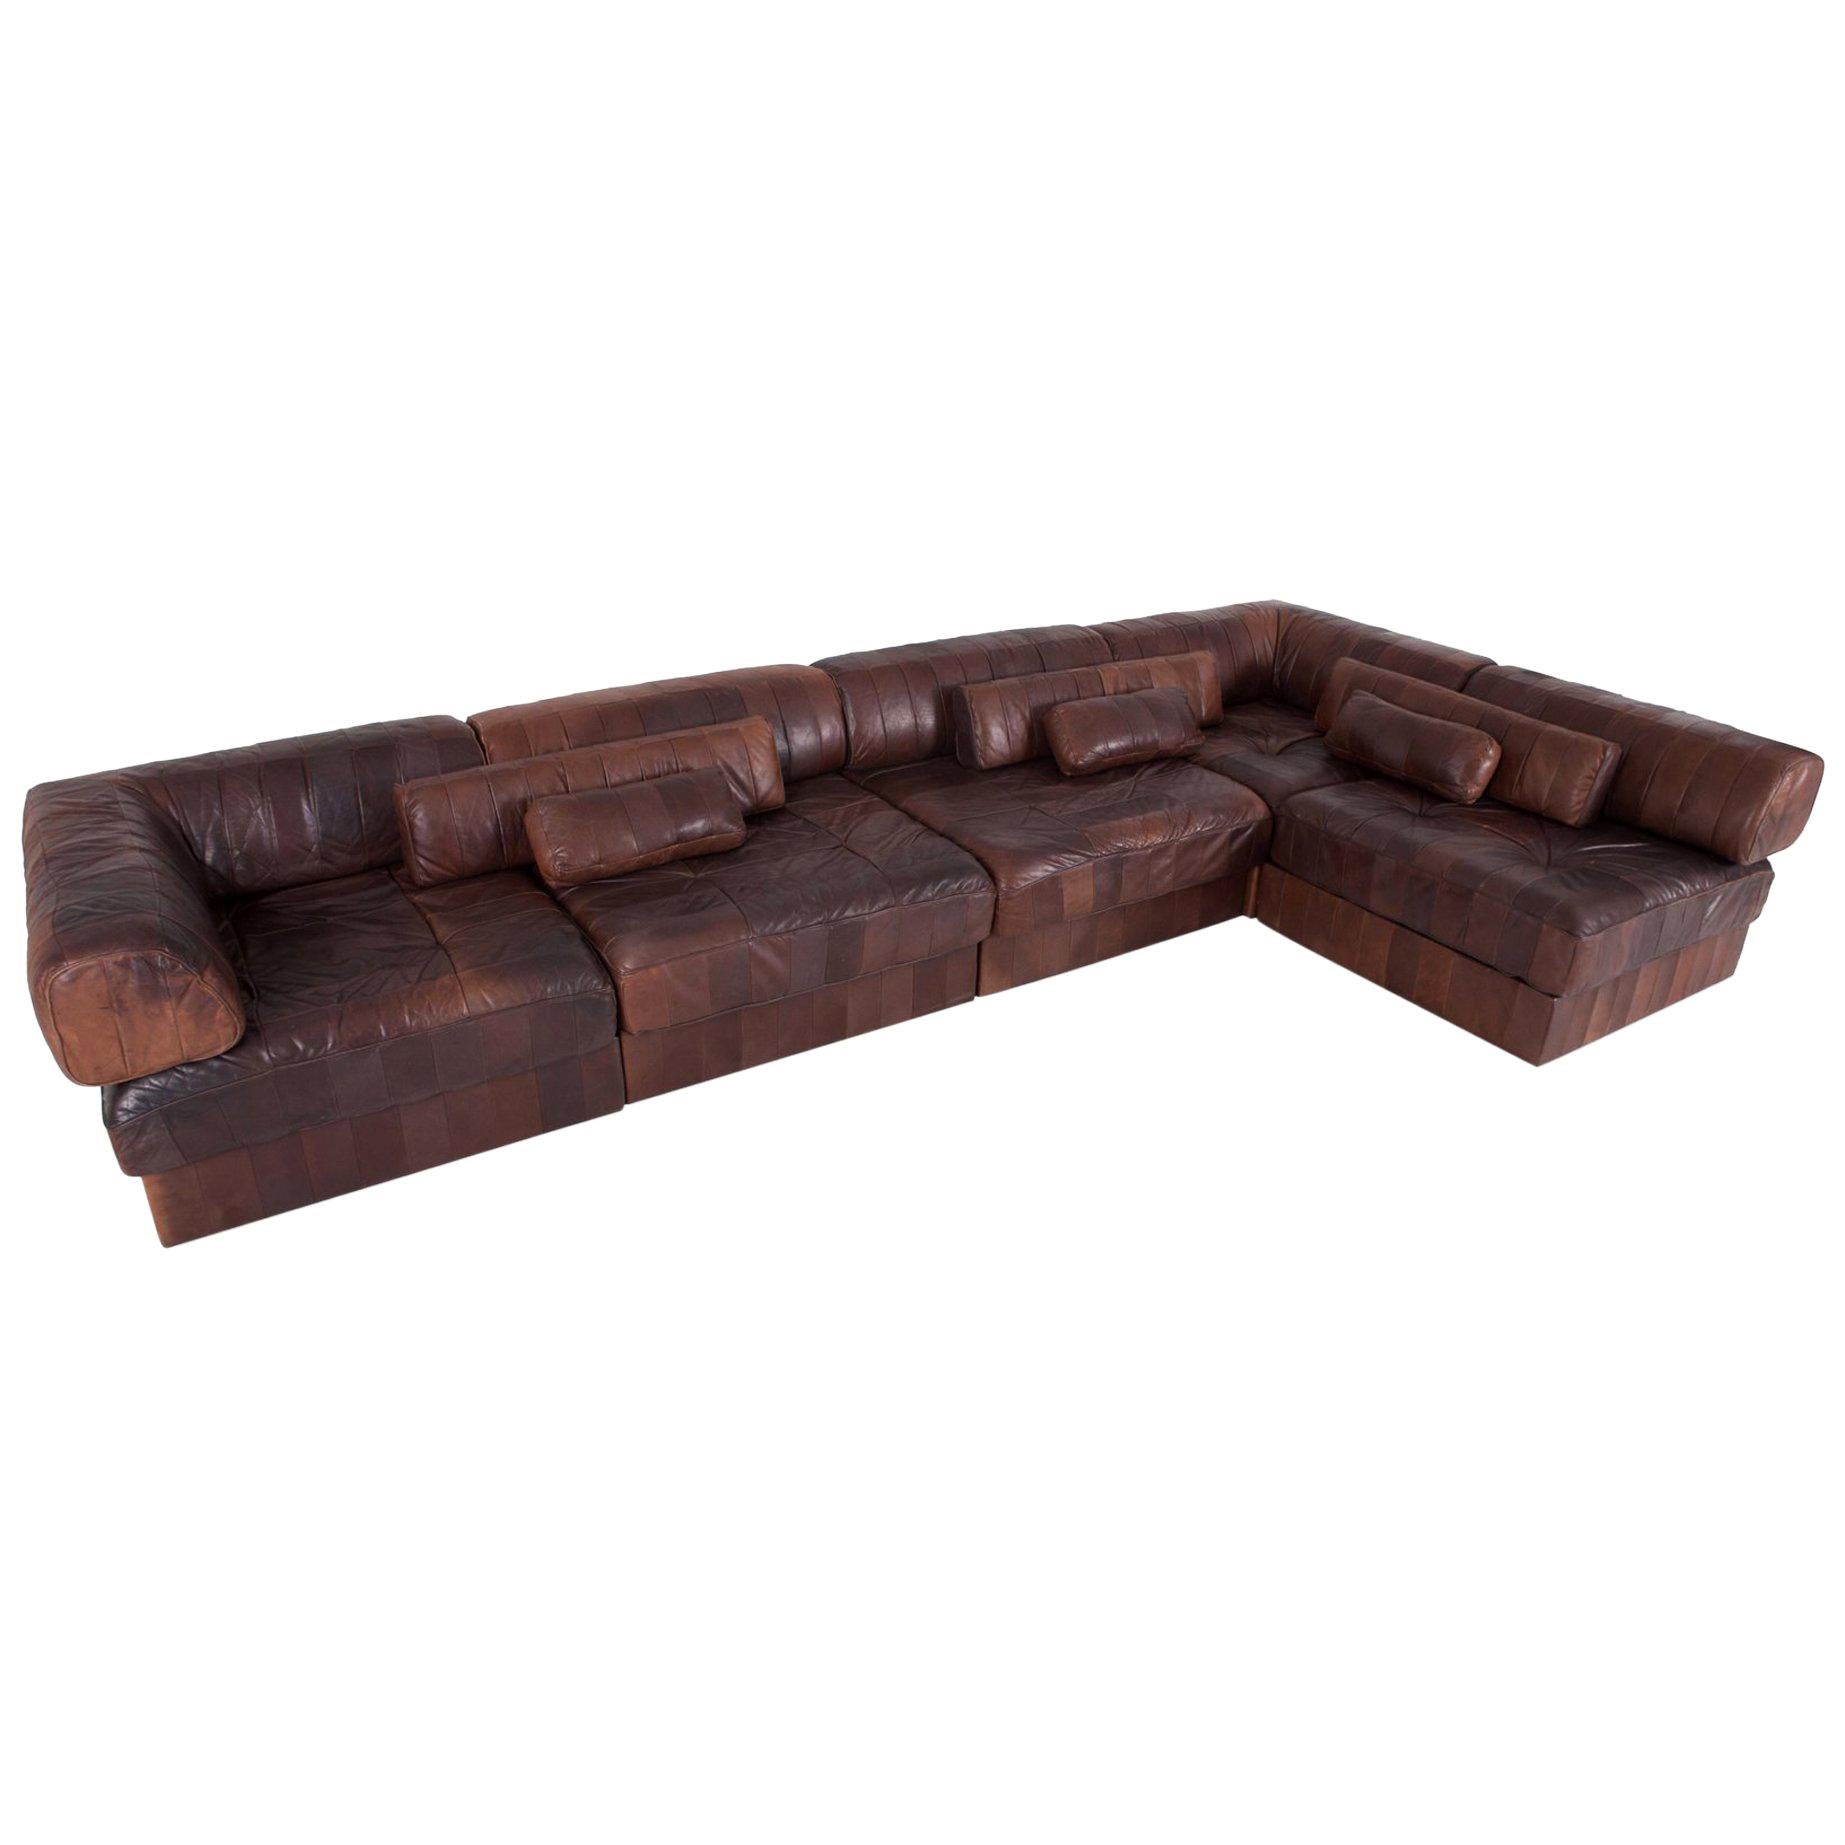 Patchwork brown leather sectional couch, De Sede Switzerland, model DS 88

Hand built in the 1970s to incredibly high standards by De Sede craftsman in Switzerland. Made of five sections, each with a base leather patchwork cushion and a back